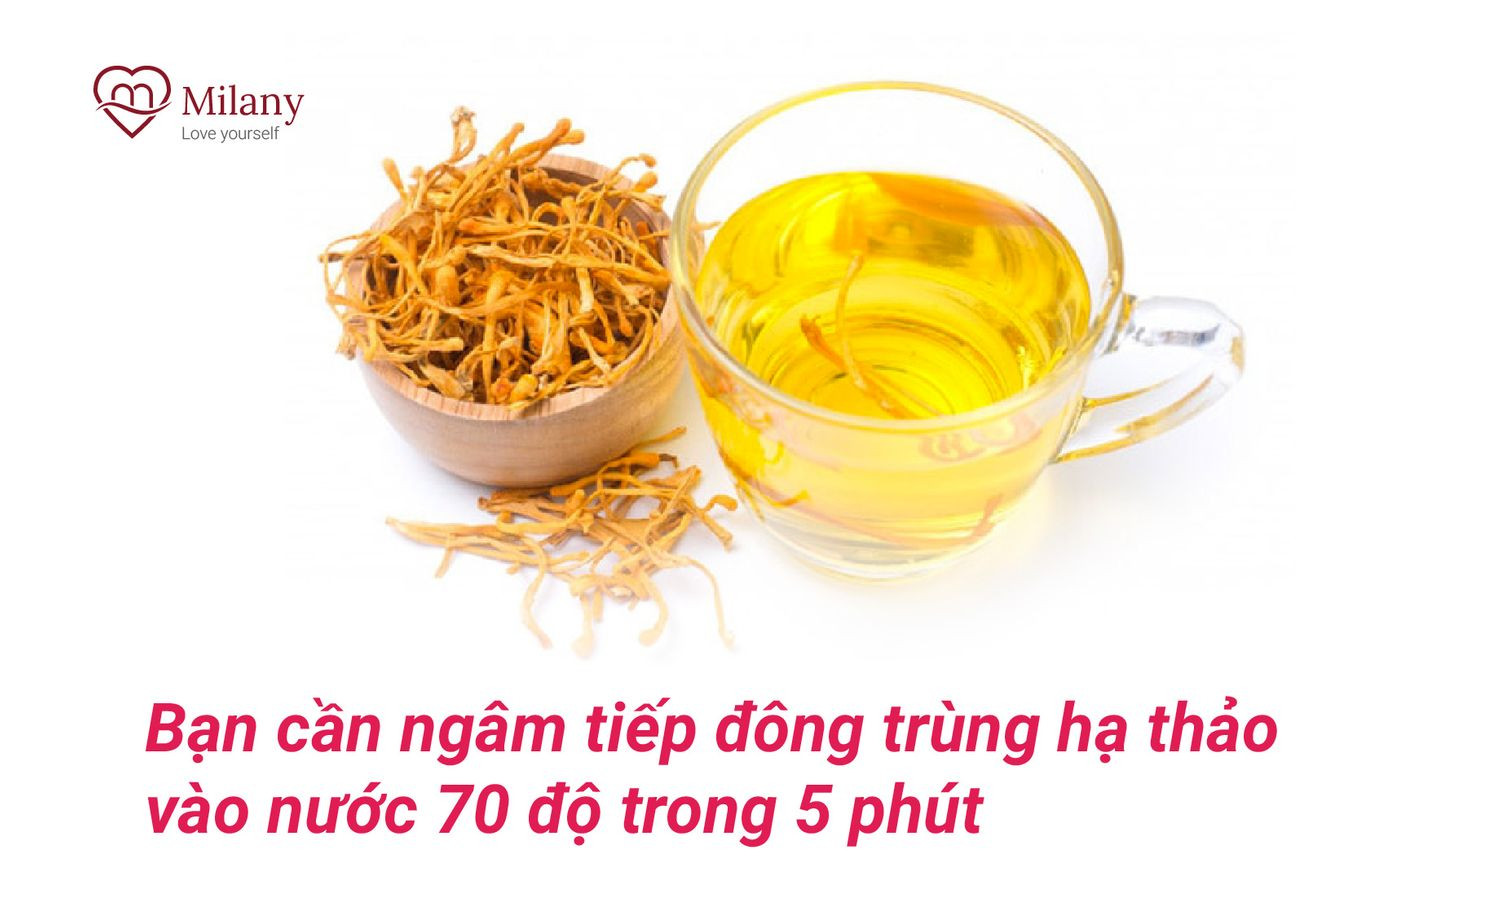 cach dung dong trung ha thao